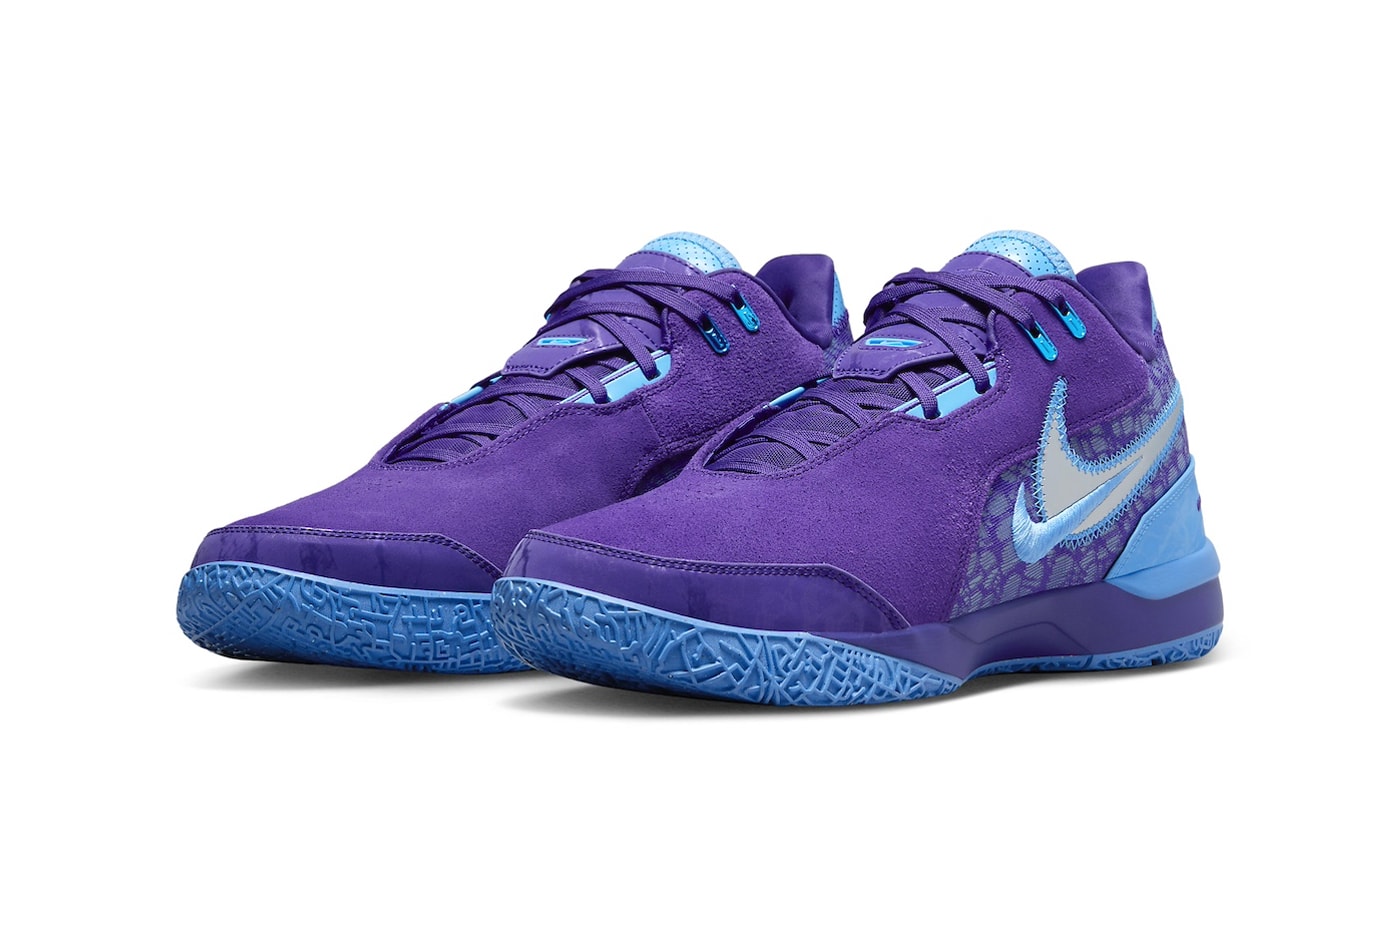 Official Look at the Nike Zoom LeBron NXXT Gen "Summit Lake Hornets" FJ1566-500 release info lebron james basketball nba charlotte hornets los angeles lakers colorway